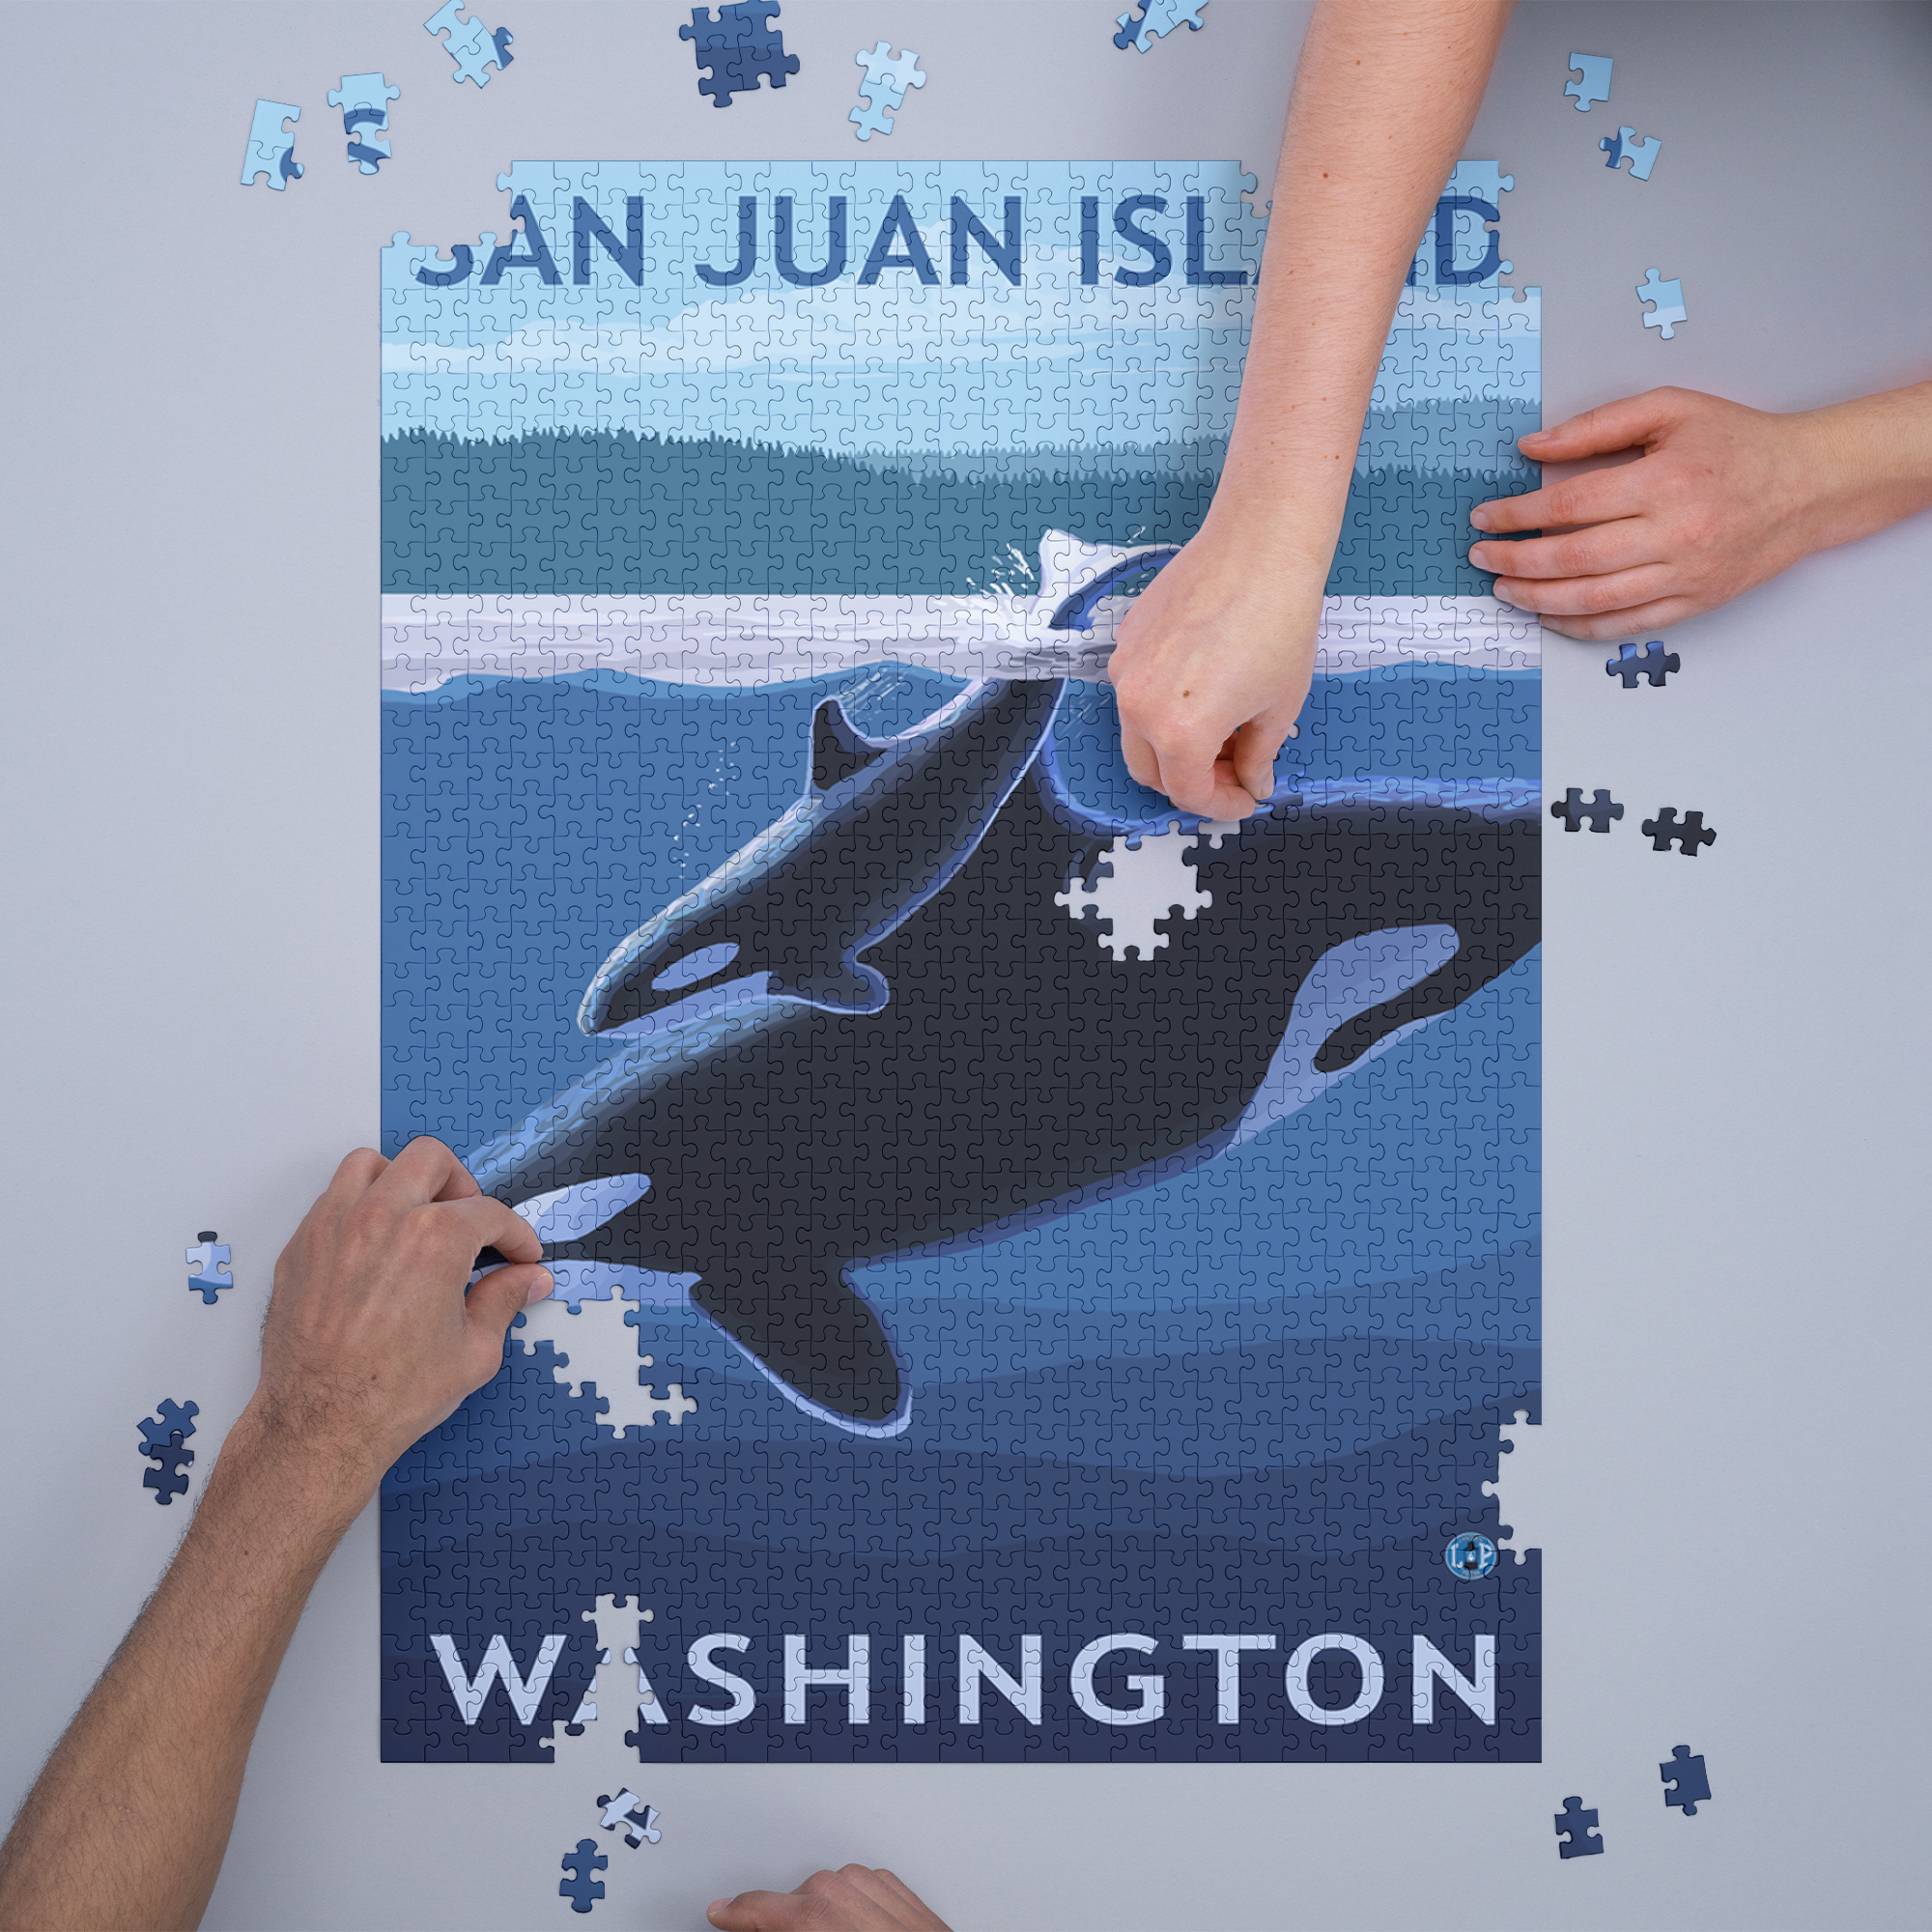 San Juan Island, Washington, Orca and Calf (1000 Piece Puzzle, Size 19x27, Challenging Jigsaw Puzzle for Adults and Family, Made in USA) - image 3 of 4